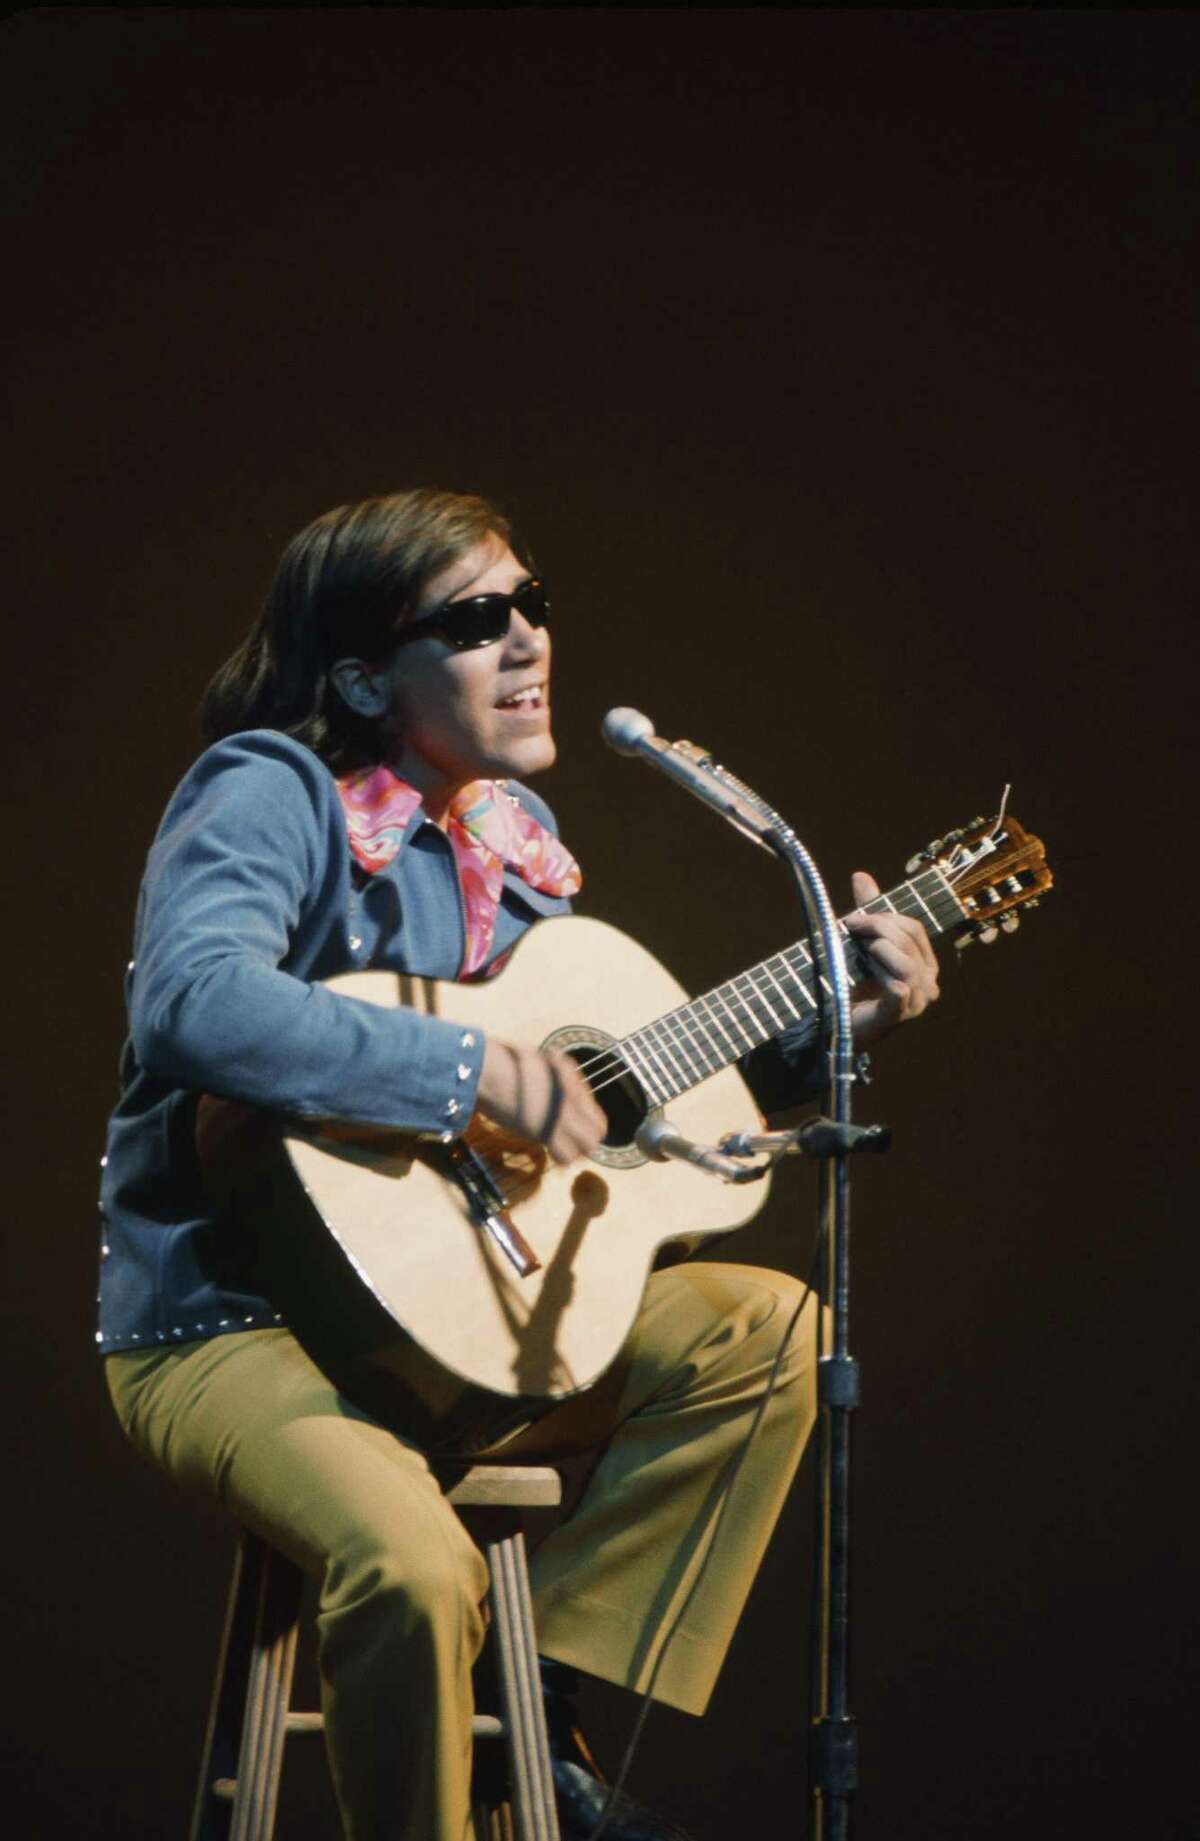 THE MIDNIGHT SPECIAL -- Episode 20 -- Pictured: Jose Feliciano (Photo by Paul W. Bailey/NBC/NBCU Photo Bank via Getty Images)